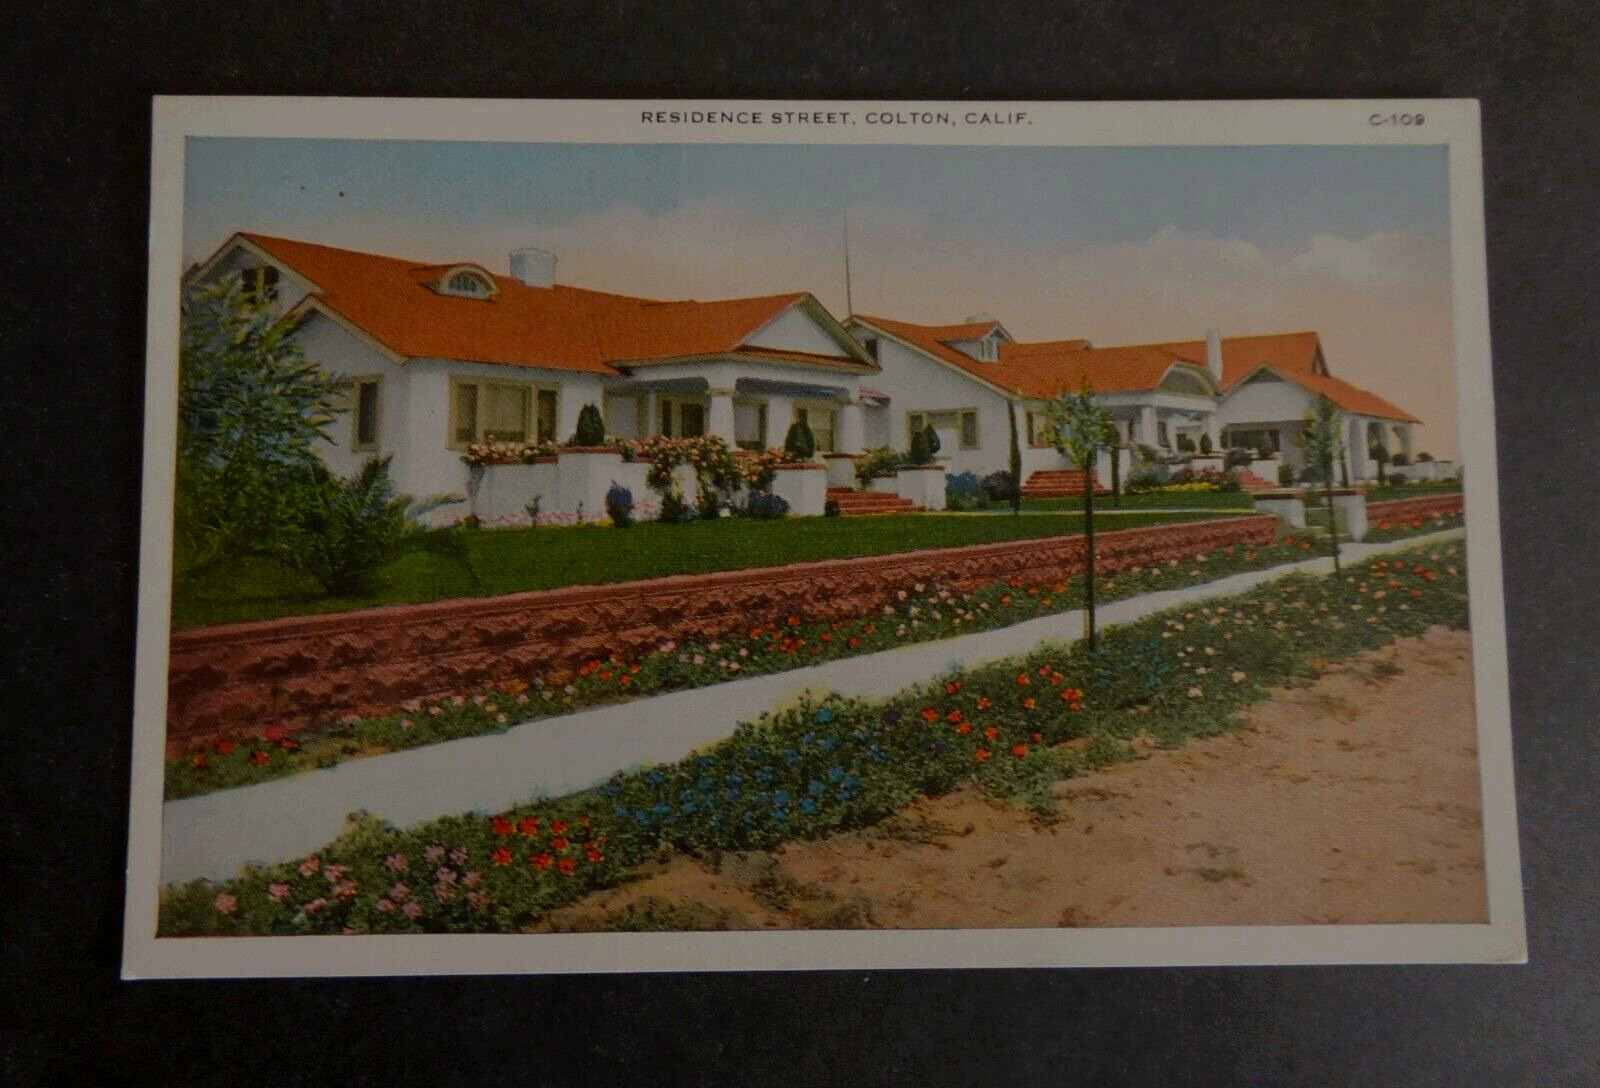 1920s California Bungalow Homes Colton Residential Street Scene Lots of Flowers